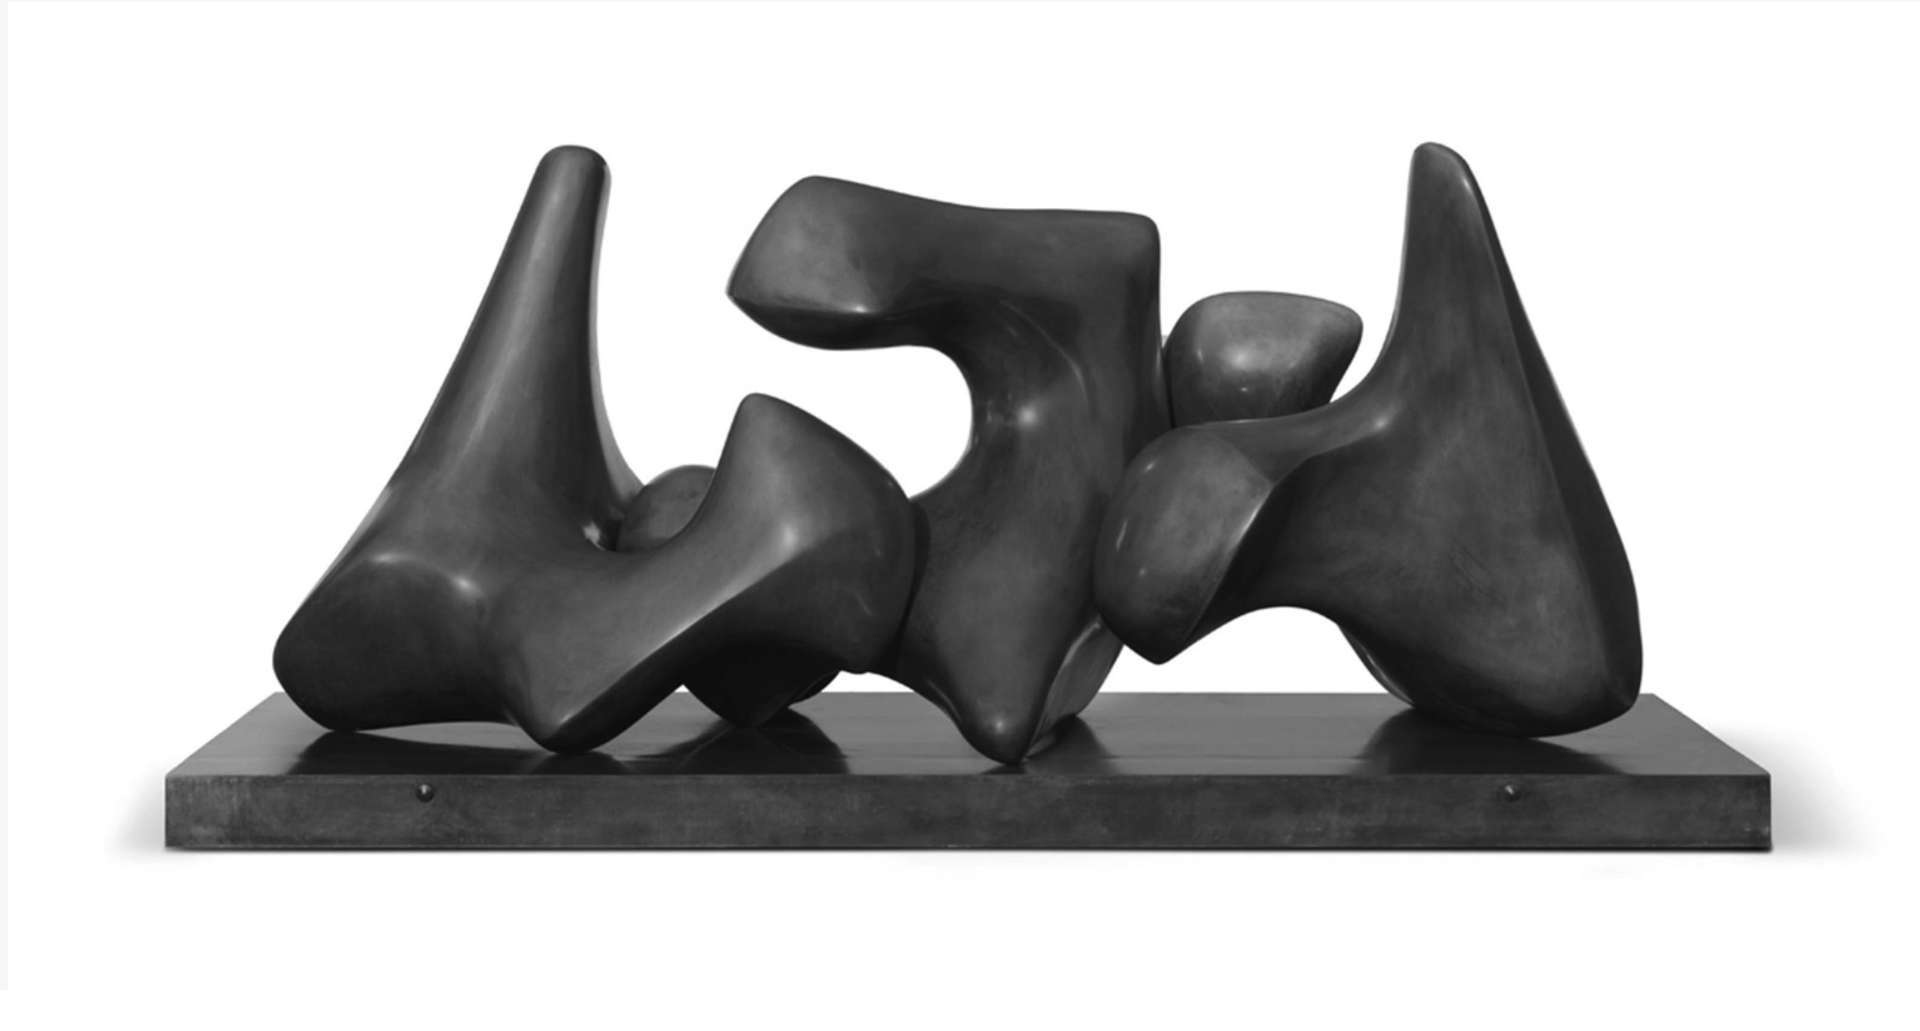 Henry Moore's vertebrae sculpture featuring three interconnected fragments balanced in harmony. Each piece rests upon and supports the others. The sculpture showcases subtle variations in form, enhancing the dynamic viewing experience.